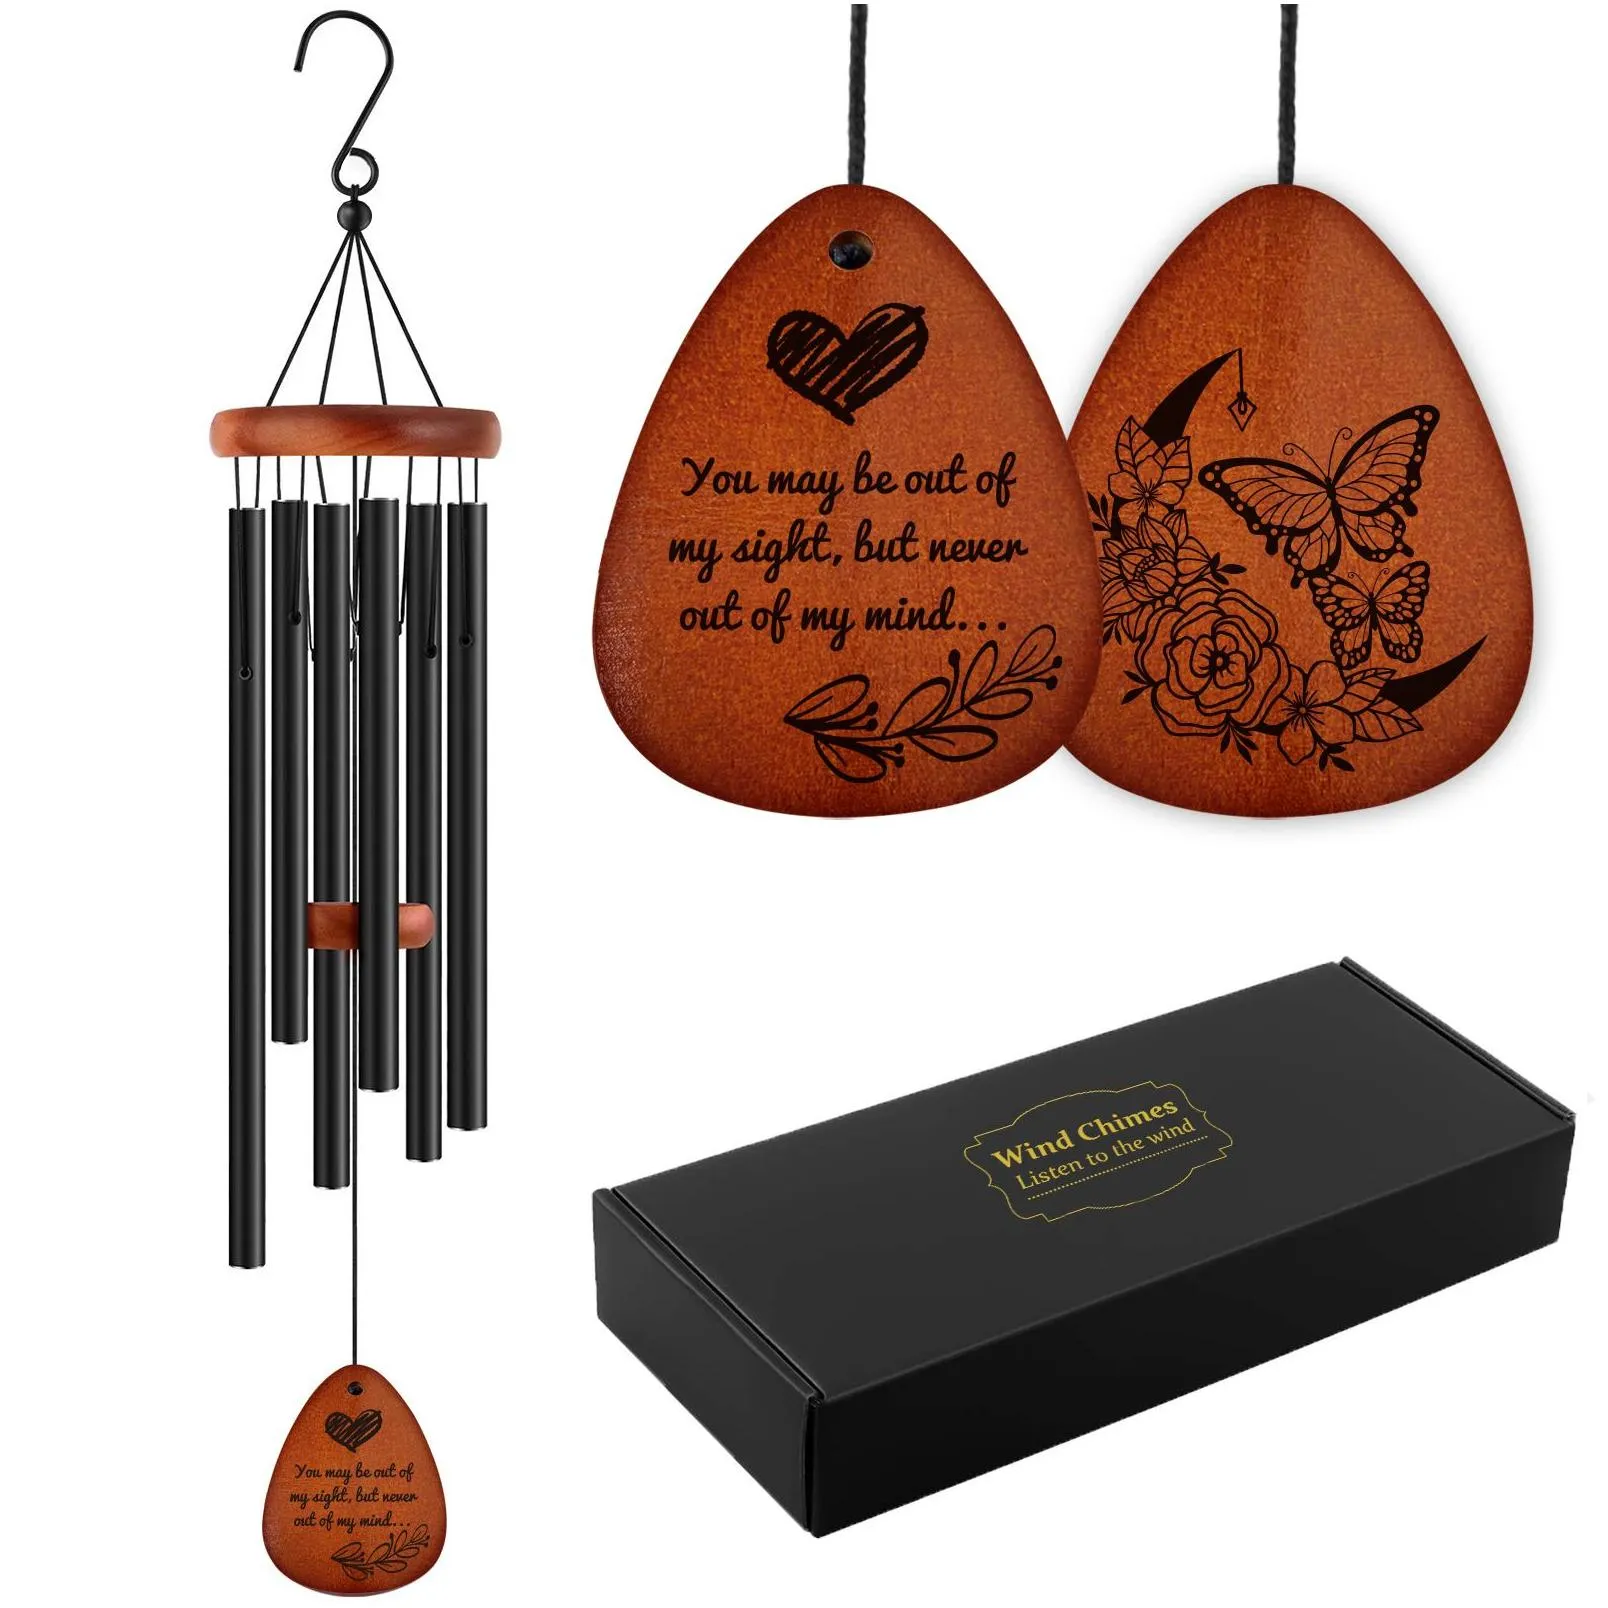 other event party supplies sympathy wind chimes memorial gift with poem for outside for loss of loved one when someone become butterfly